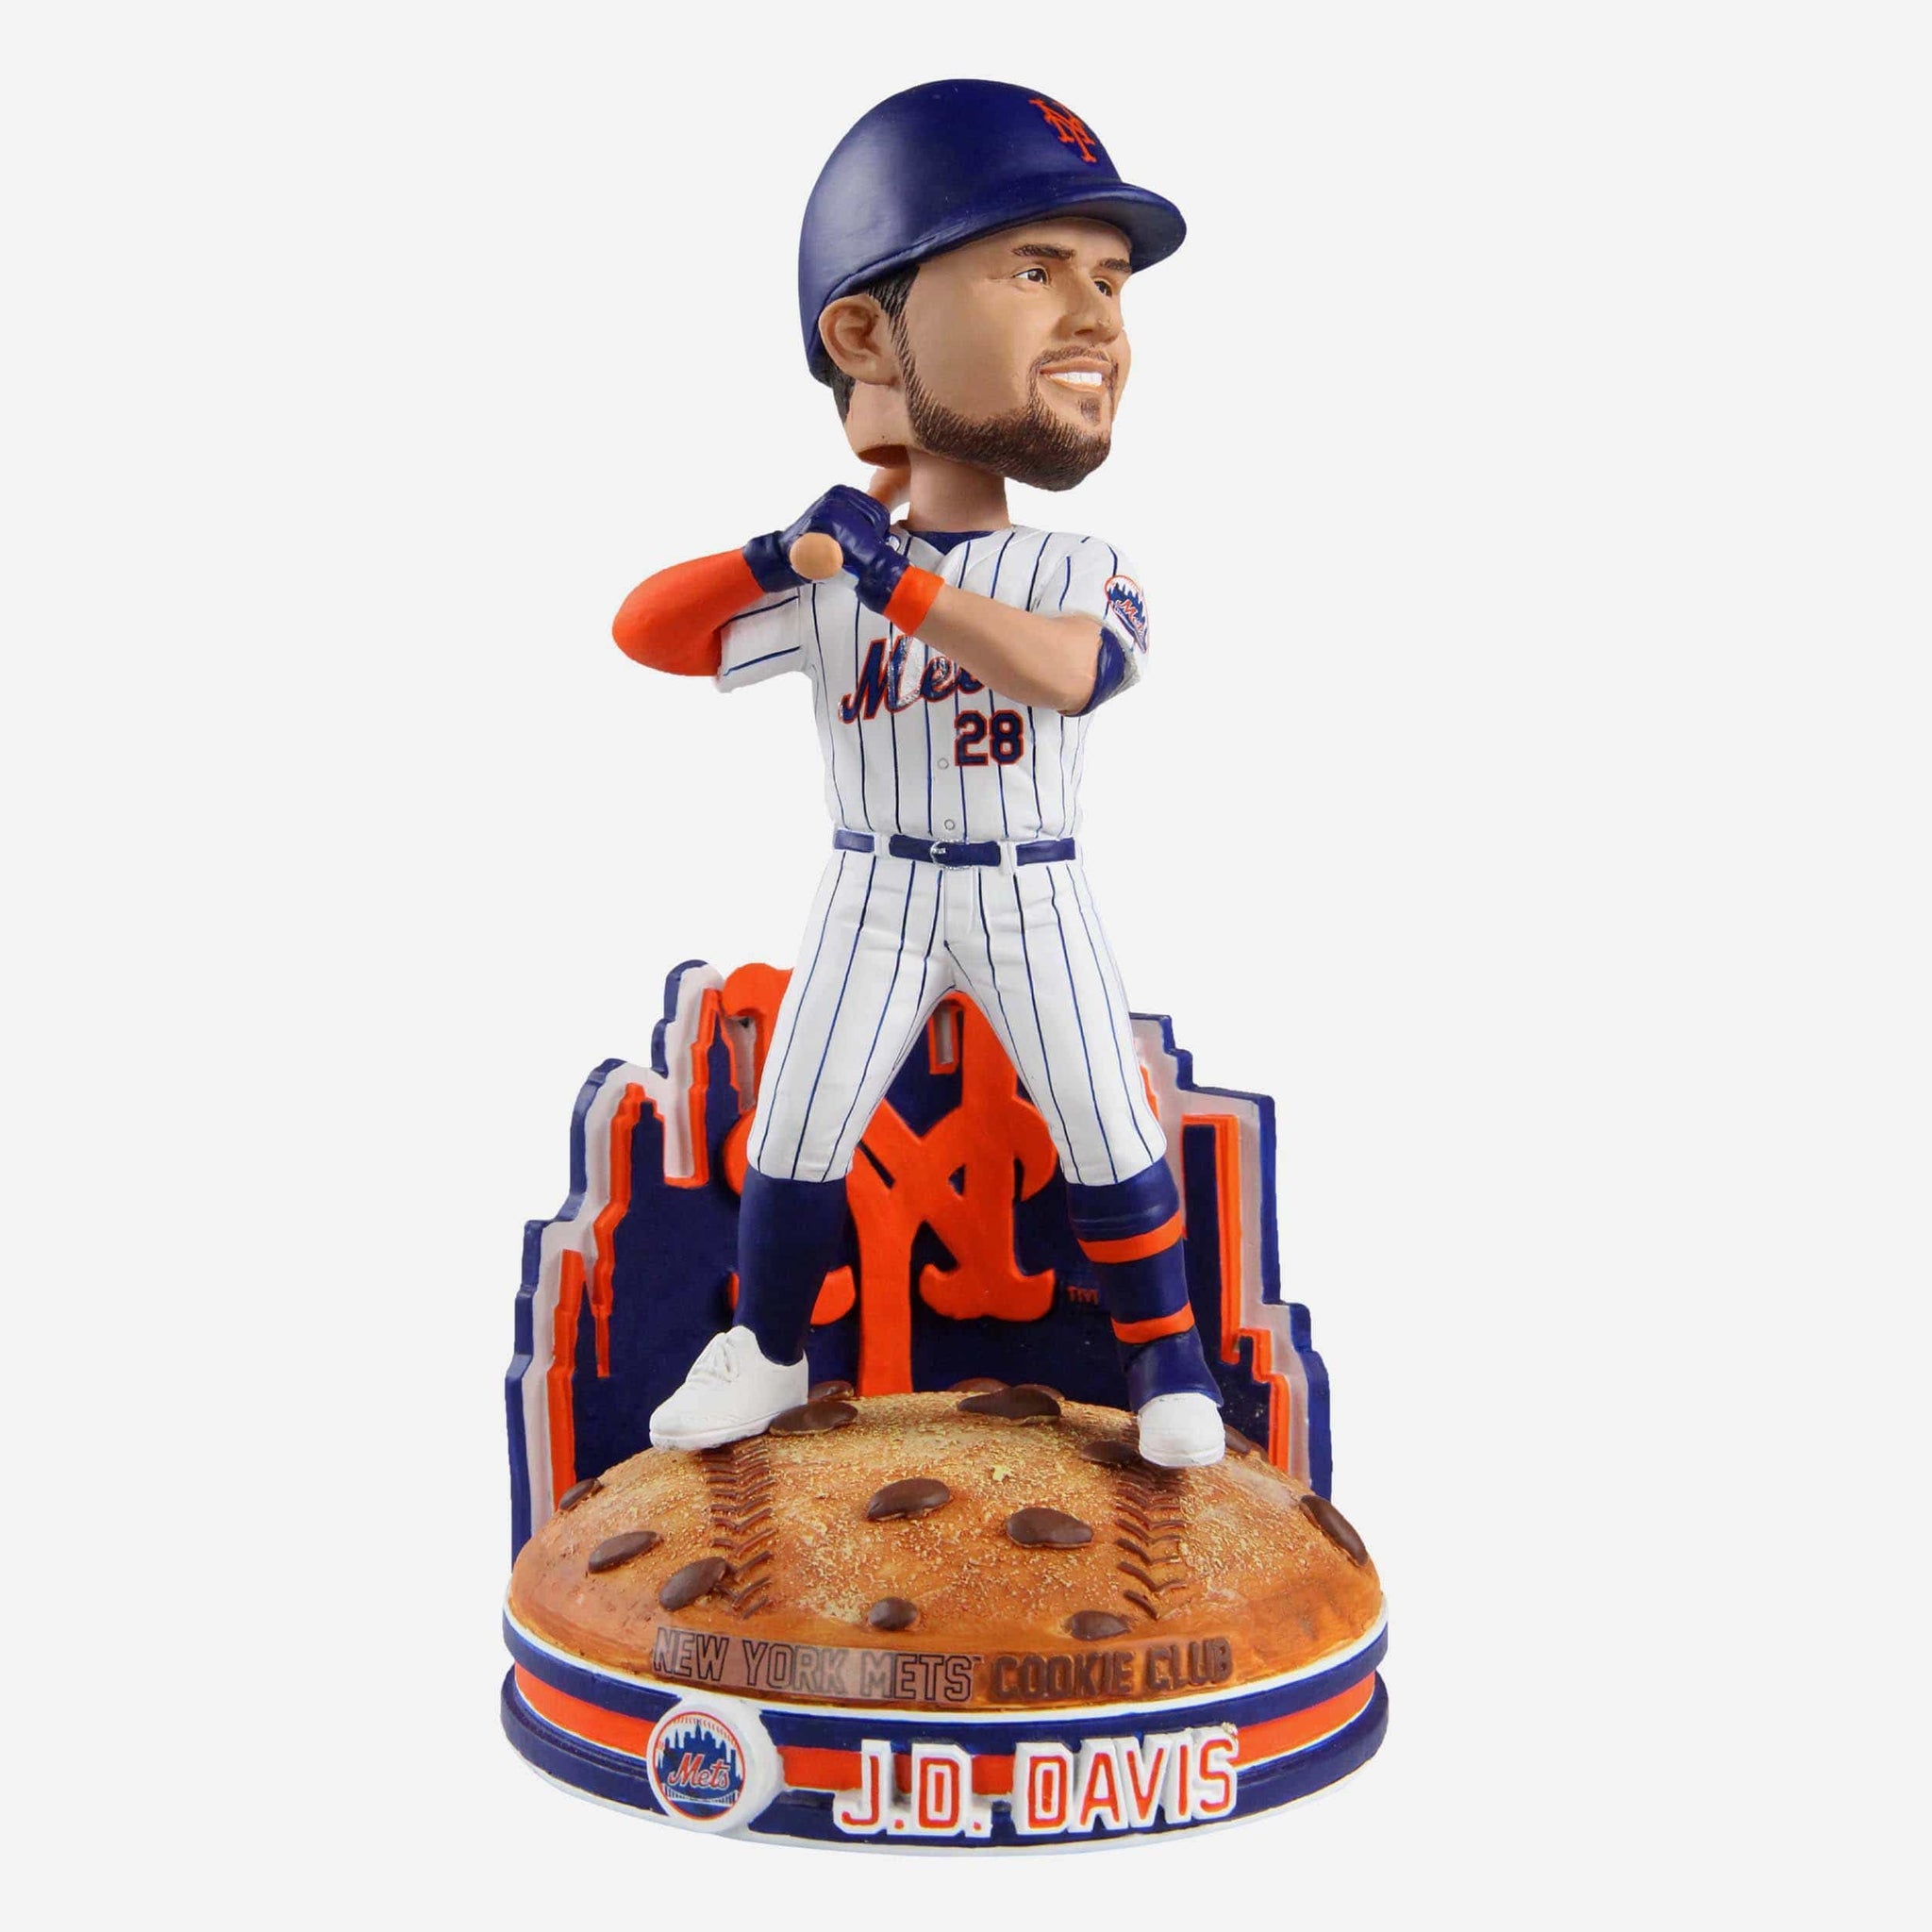 New York Mets Signed Bobbleheads & Figurines, Collectible Mets